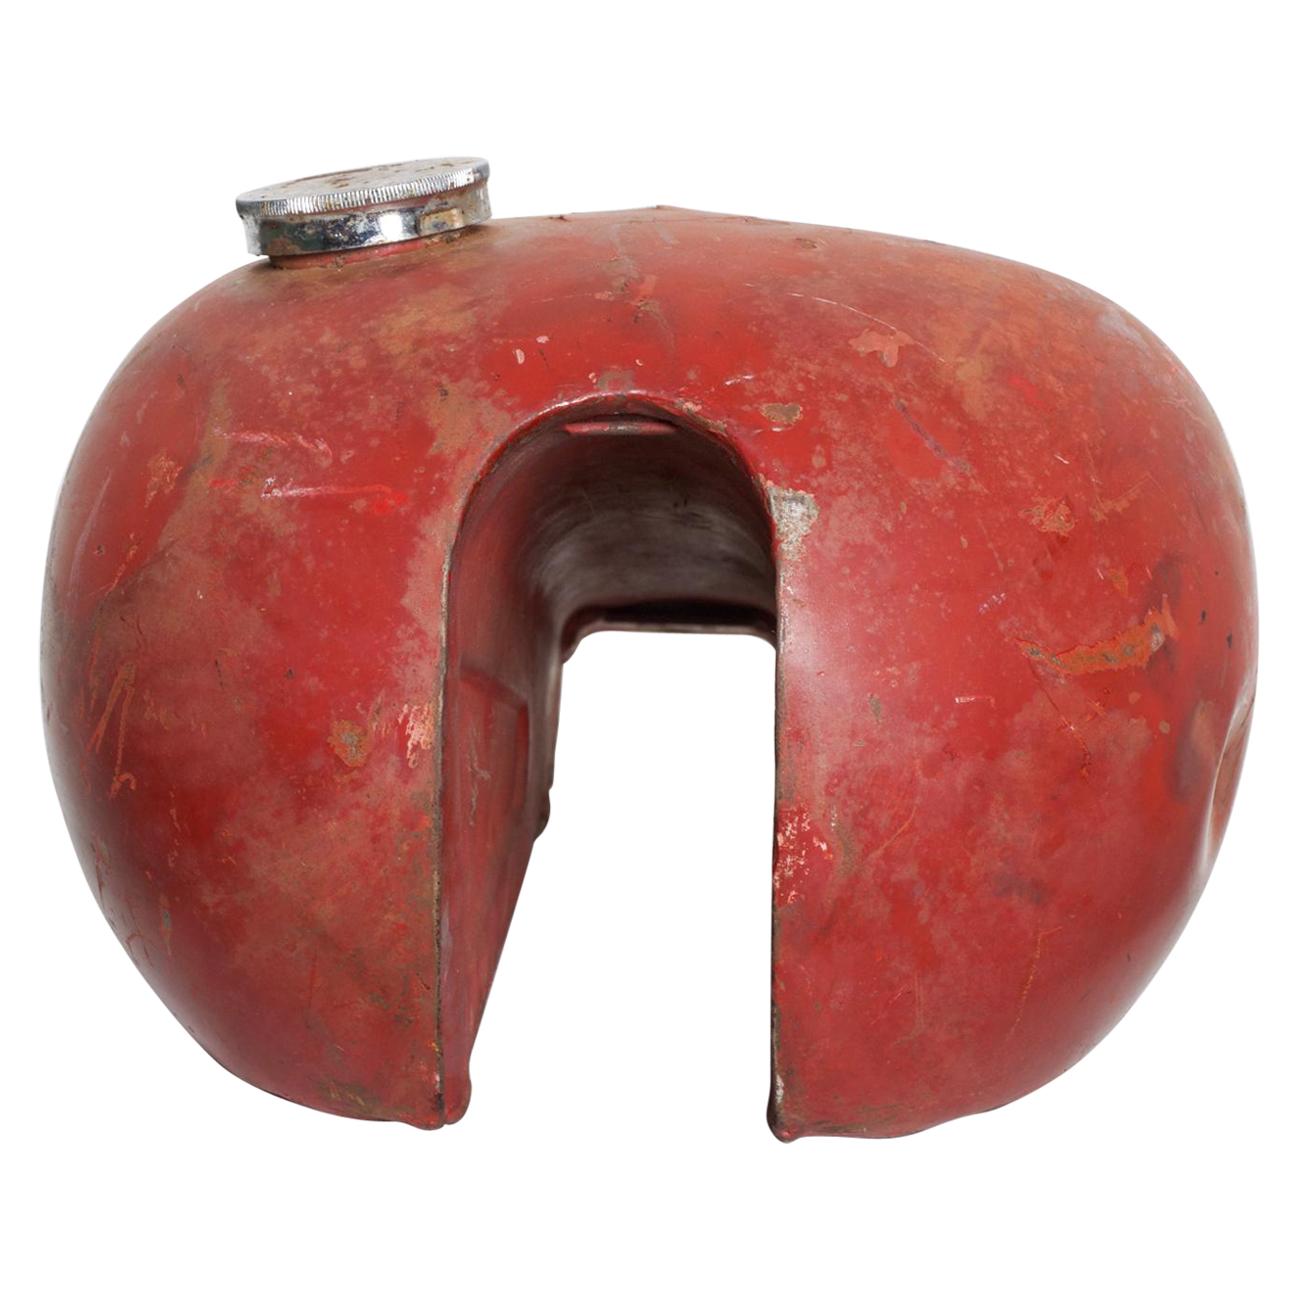 For your enjoyment: Distressed vintage motorcycle gas tank in fabulous red
Has seen a lot of use and wear--super cool weathered and worn appearance.
Ideal for man cave decor.
Unmarked.
Dimensions are: 21 L x 12 W x 10 H
Original unrestored